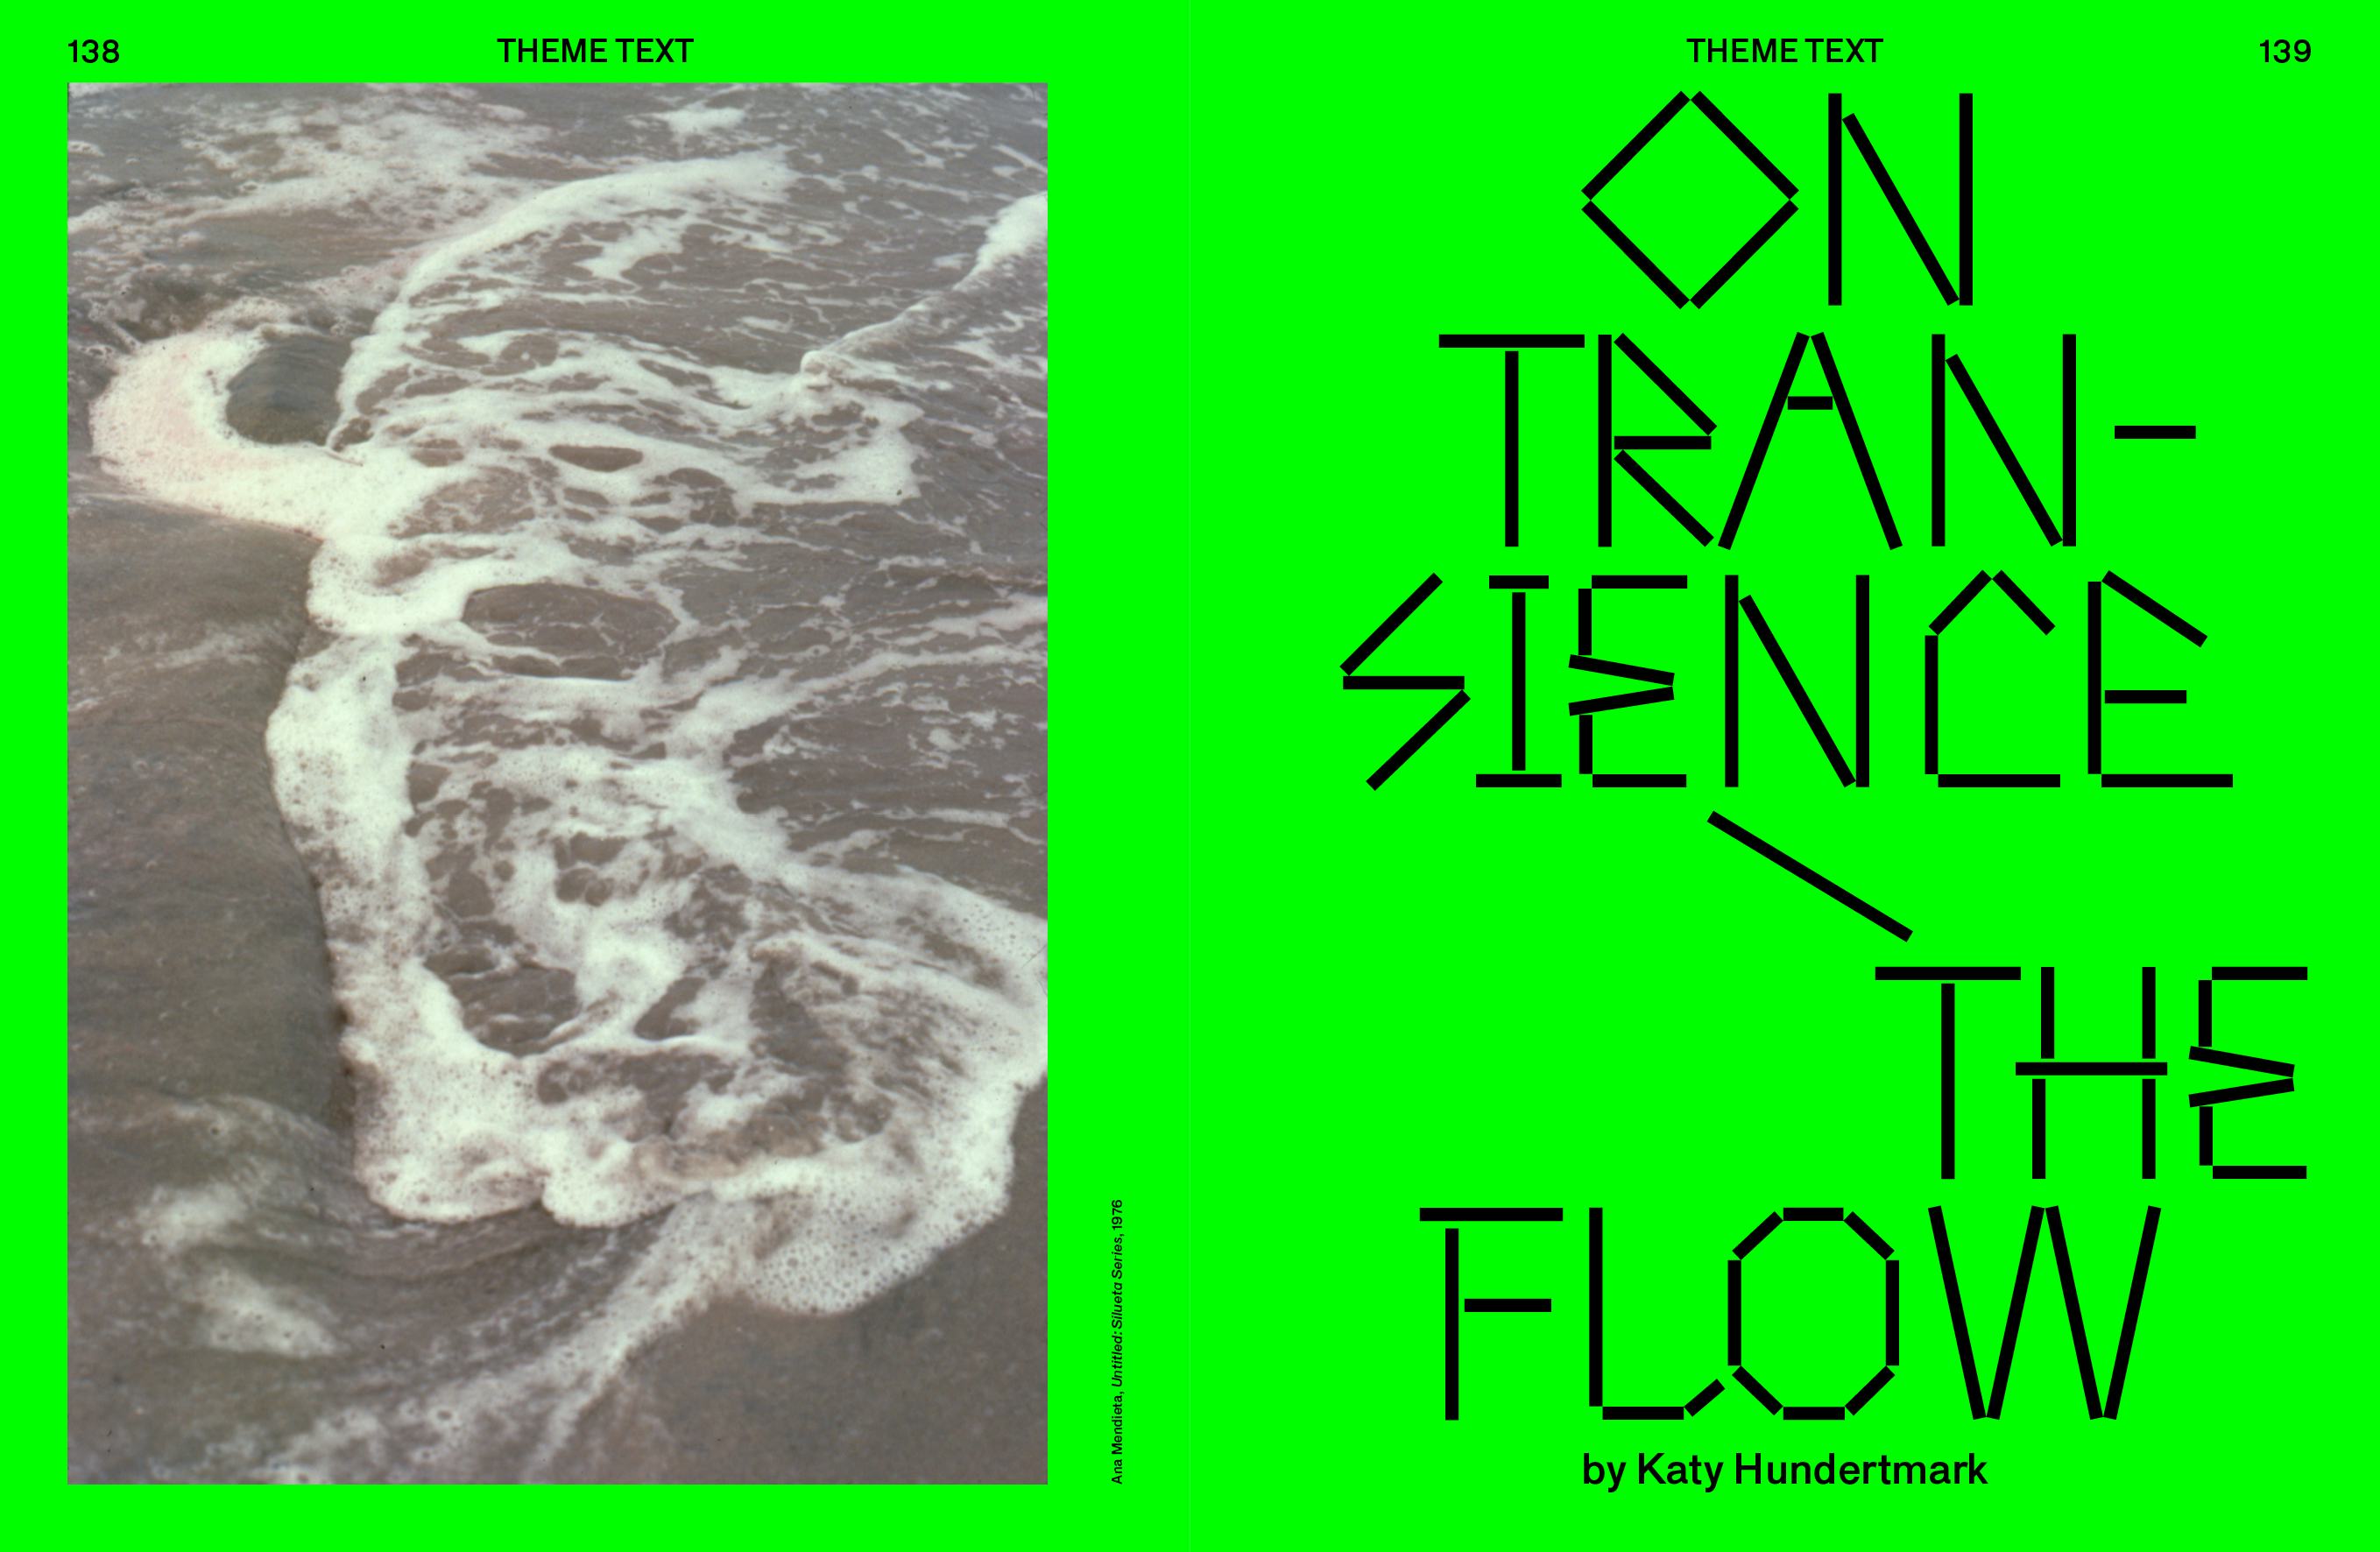 Spread of Foam Magazine #64: EXTREMES – The Environmental Issue, showing an image by Ana Mendieta of sea water flowing through an imprint of a person in the sand.